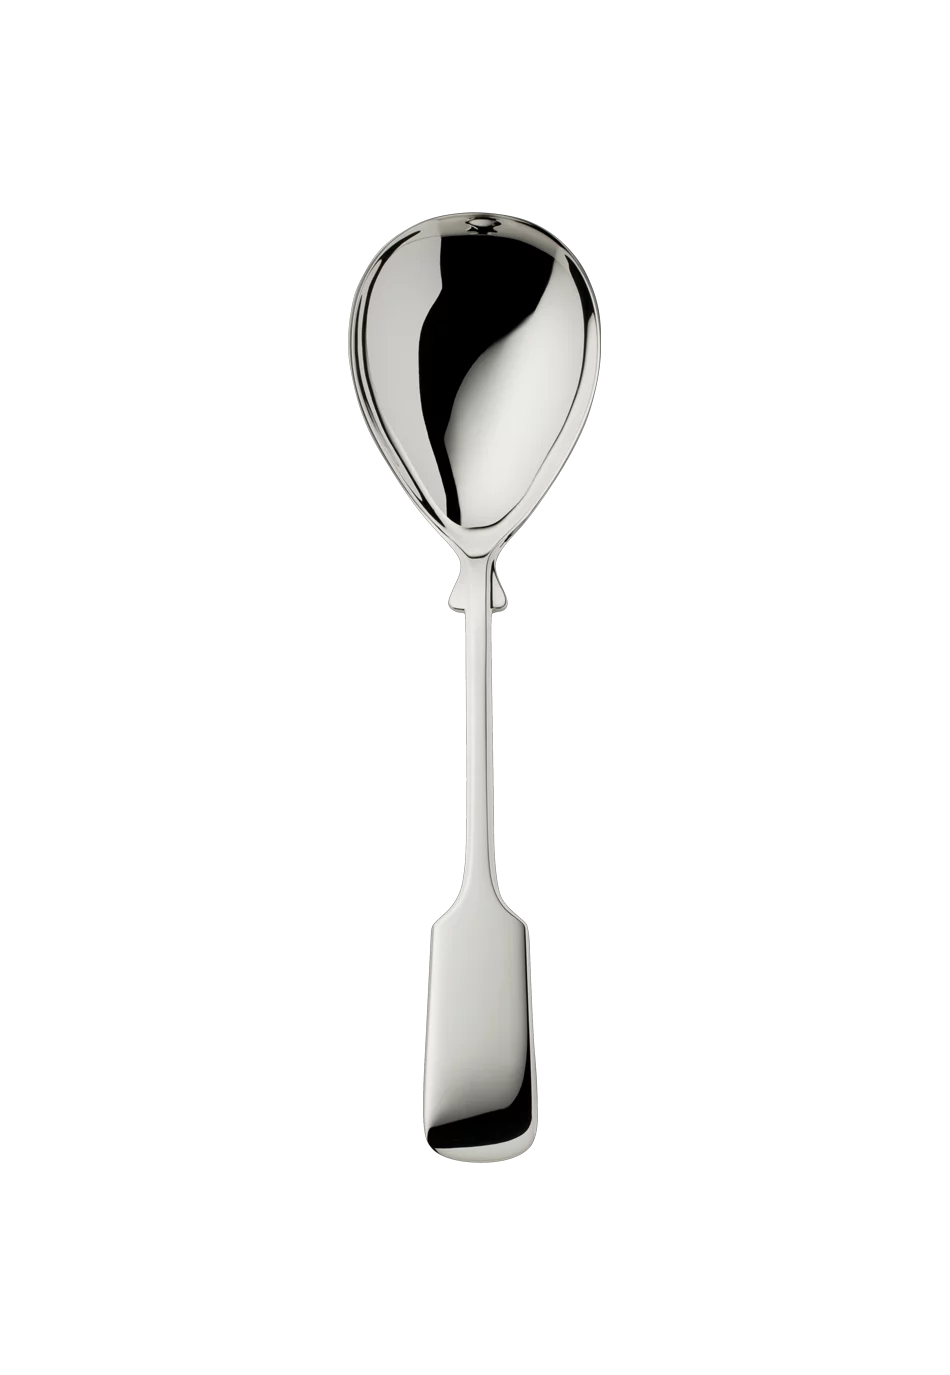 Alt-Spaten Compote/Salad Serving Spoon, large (150g massive silverplated)